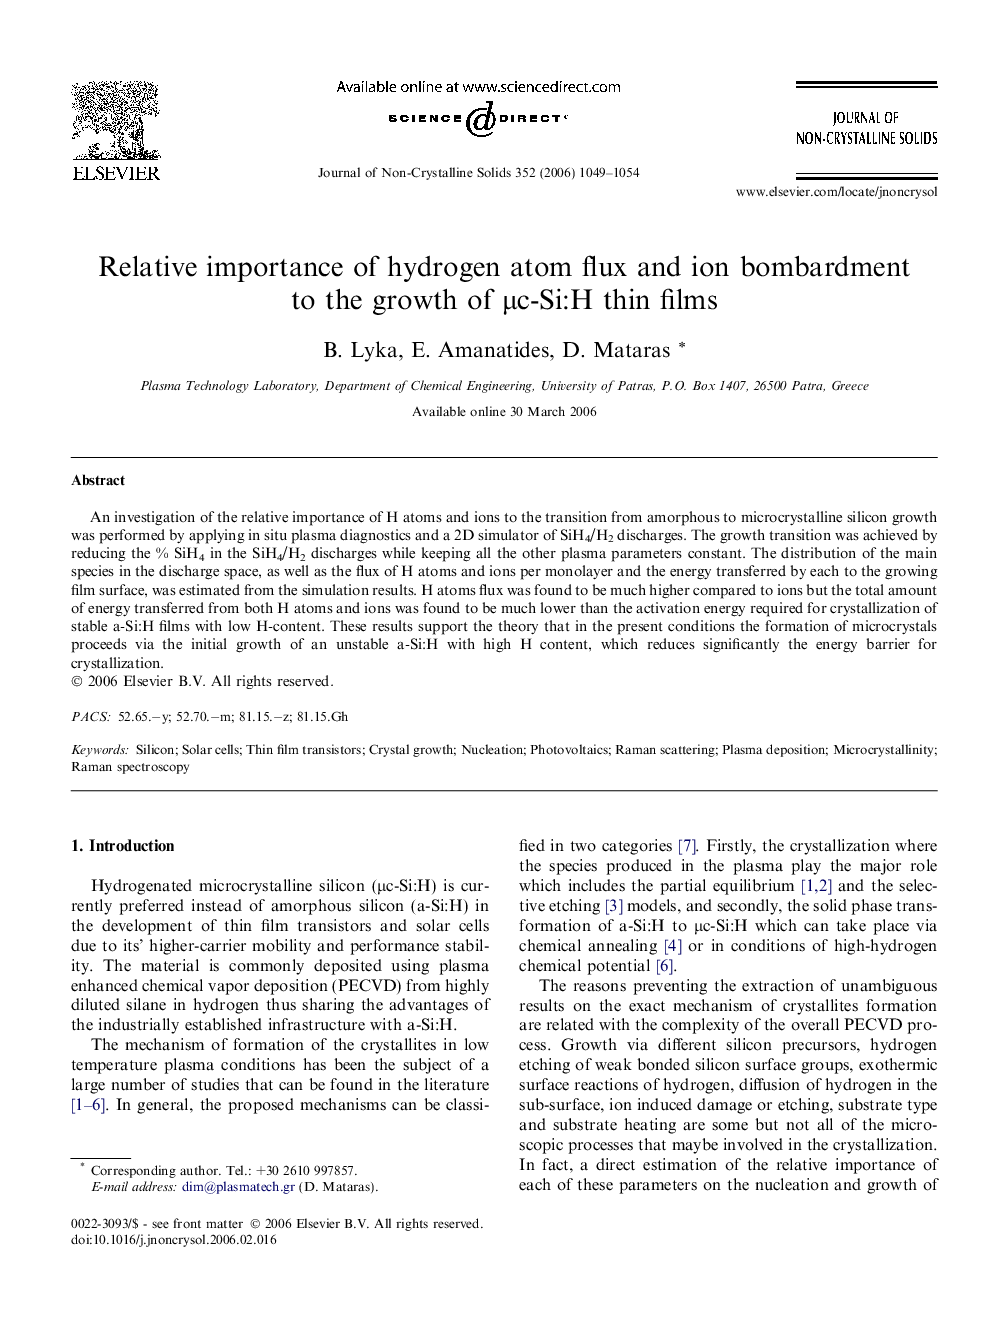 Relative importance of hydrogen atom flux and ion bombardment to the growth of Î¼c-Si:H thin films